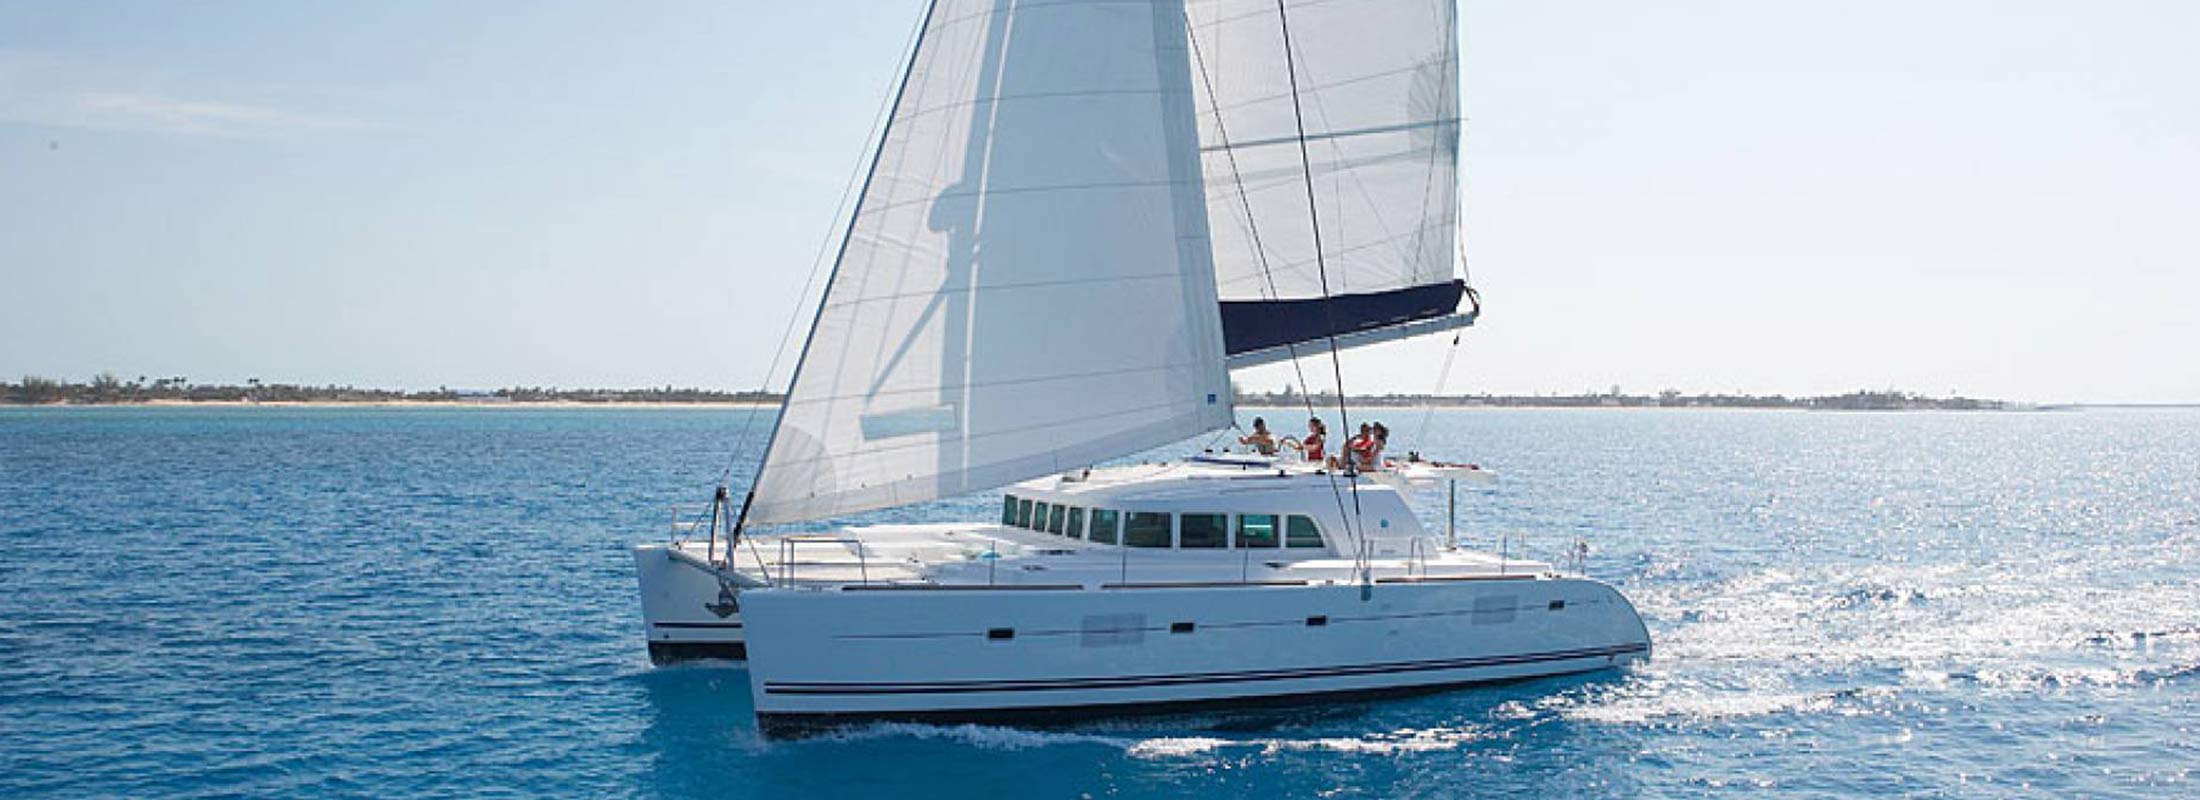 Whispers Sailing Yacht for Charter Carribean Sea The Bahamas slider 1